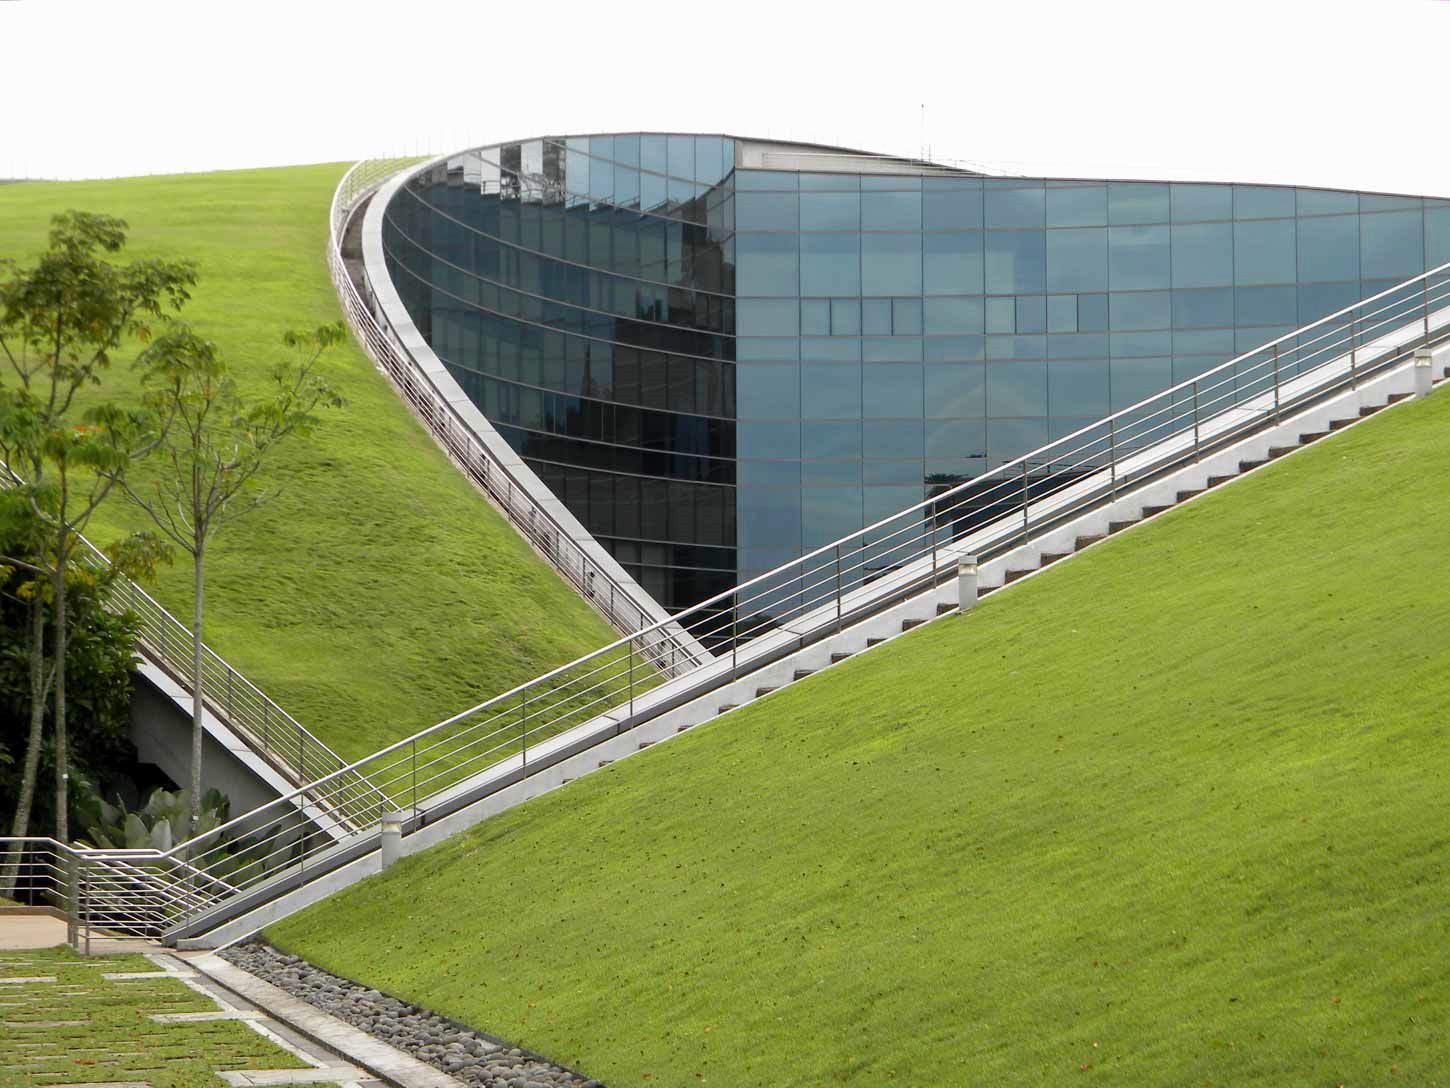 The grassy roof that runs over Nanyang Technological University's School of Art, Design, and Media.